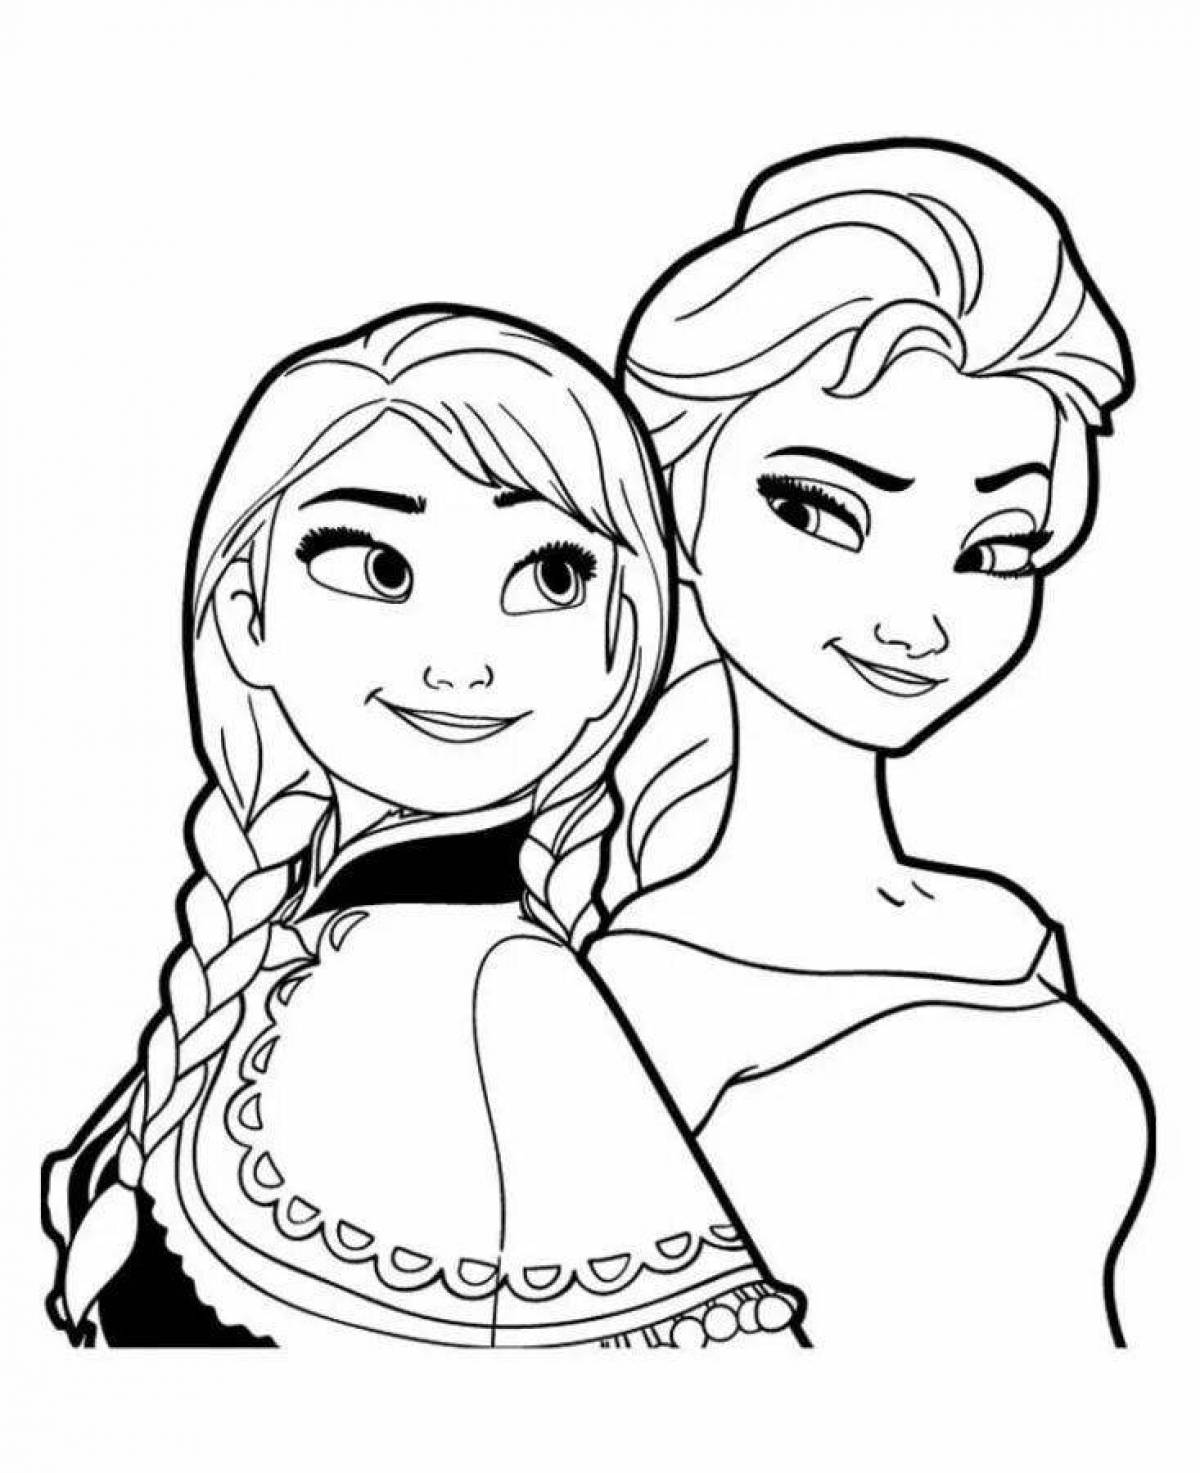 Glorious elsa coloring book for kids 3-4 years old